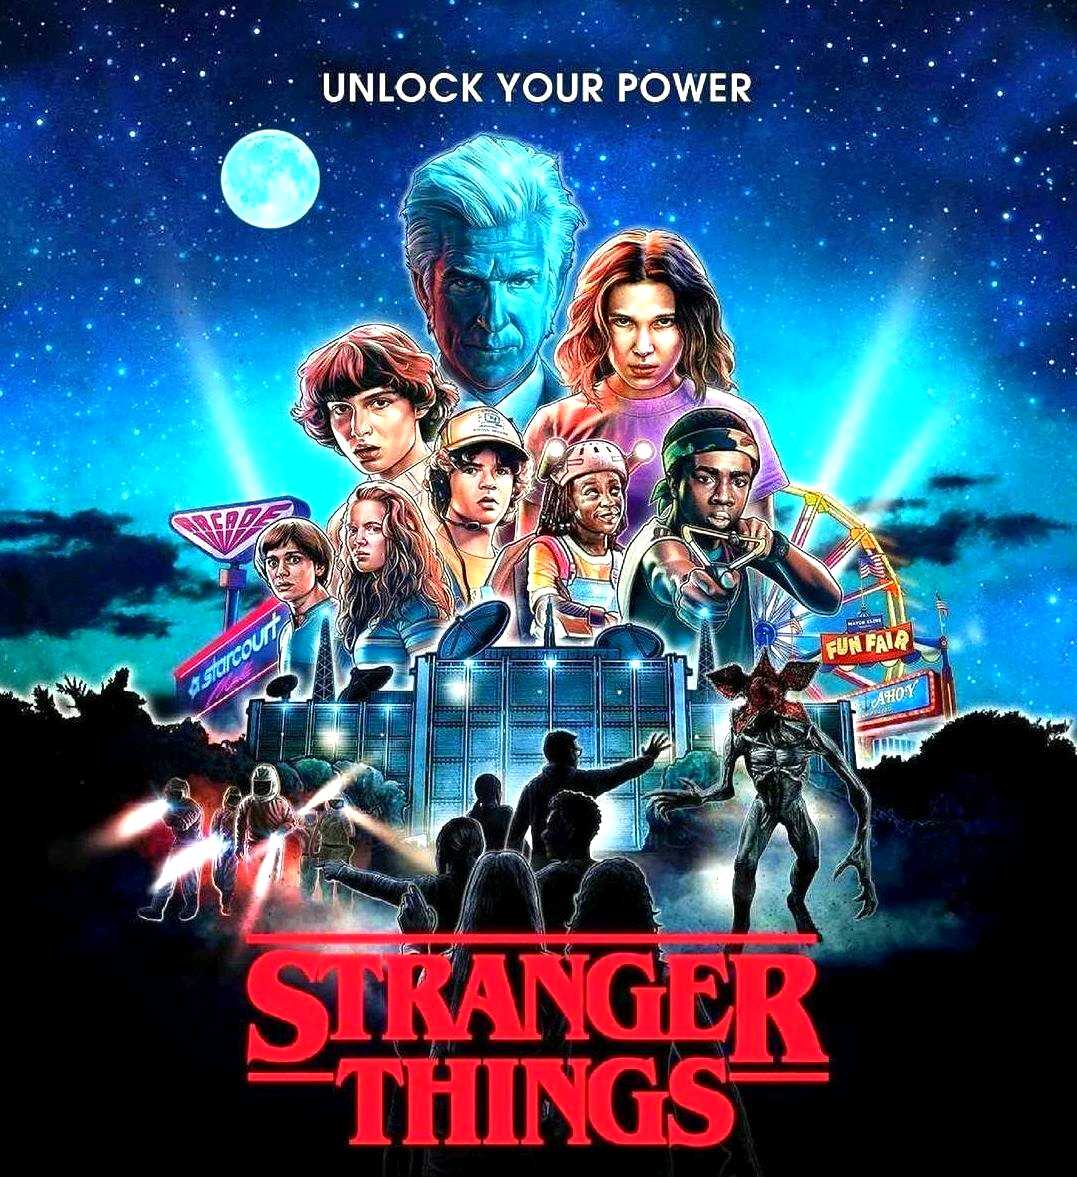 Stranger Things' and the Power of Music